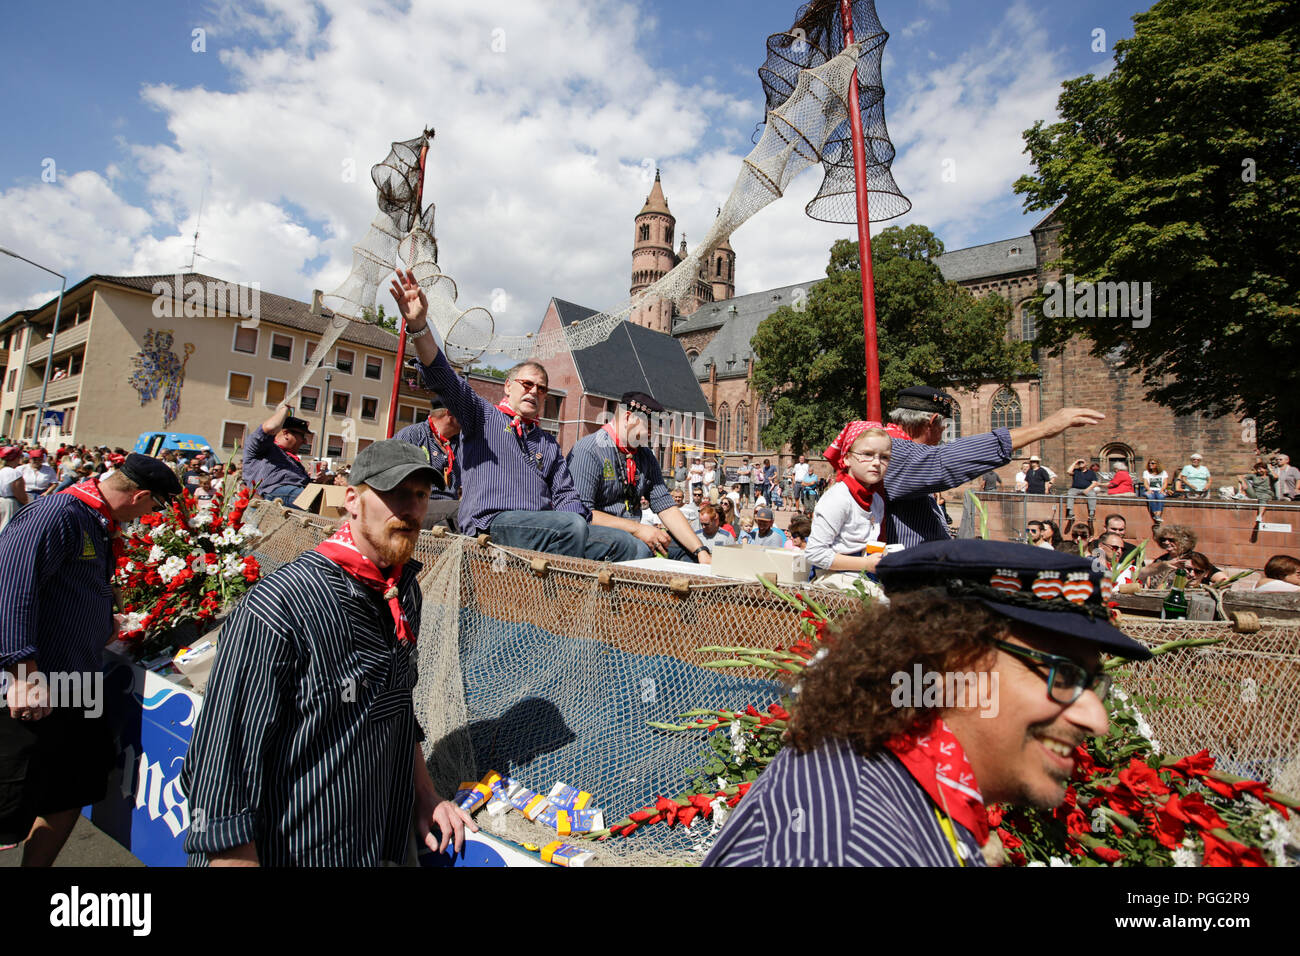 Worms, Germany. 26th August 2018. Members of the old fishermen's guild of Worms ride in a fishing boat in the parade. The first highlight of the 2018 Backfischfest was the big parade through the city of Worms with over 70 groups and floats. Community groups, music groups and businesses from Worms and further afield took part. Credit: Michael Debets/Alamy Live News Stock Photo